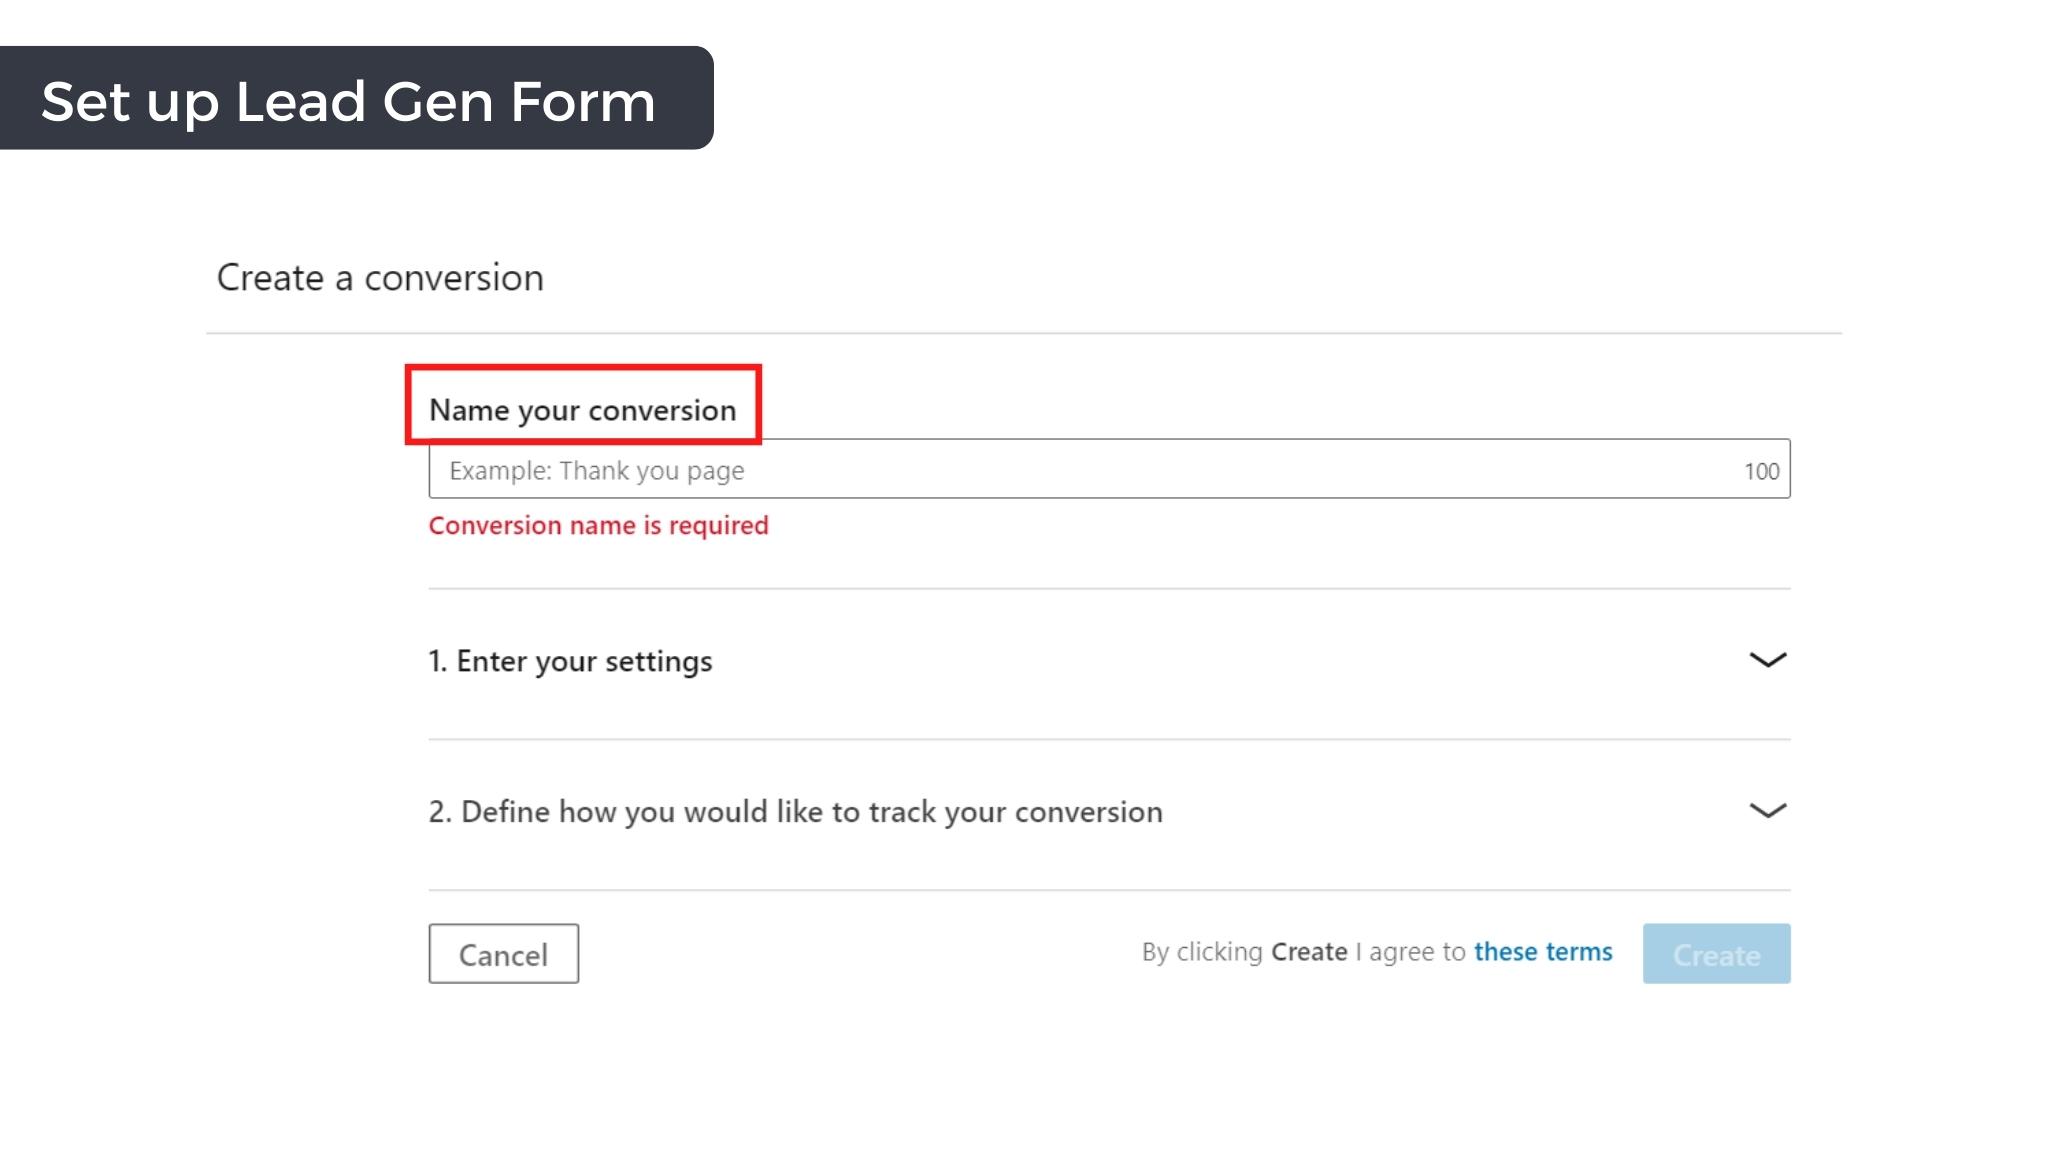 Set up conversion tracking and lead gen form